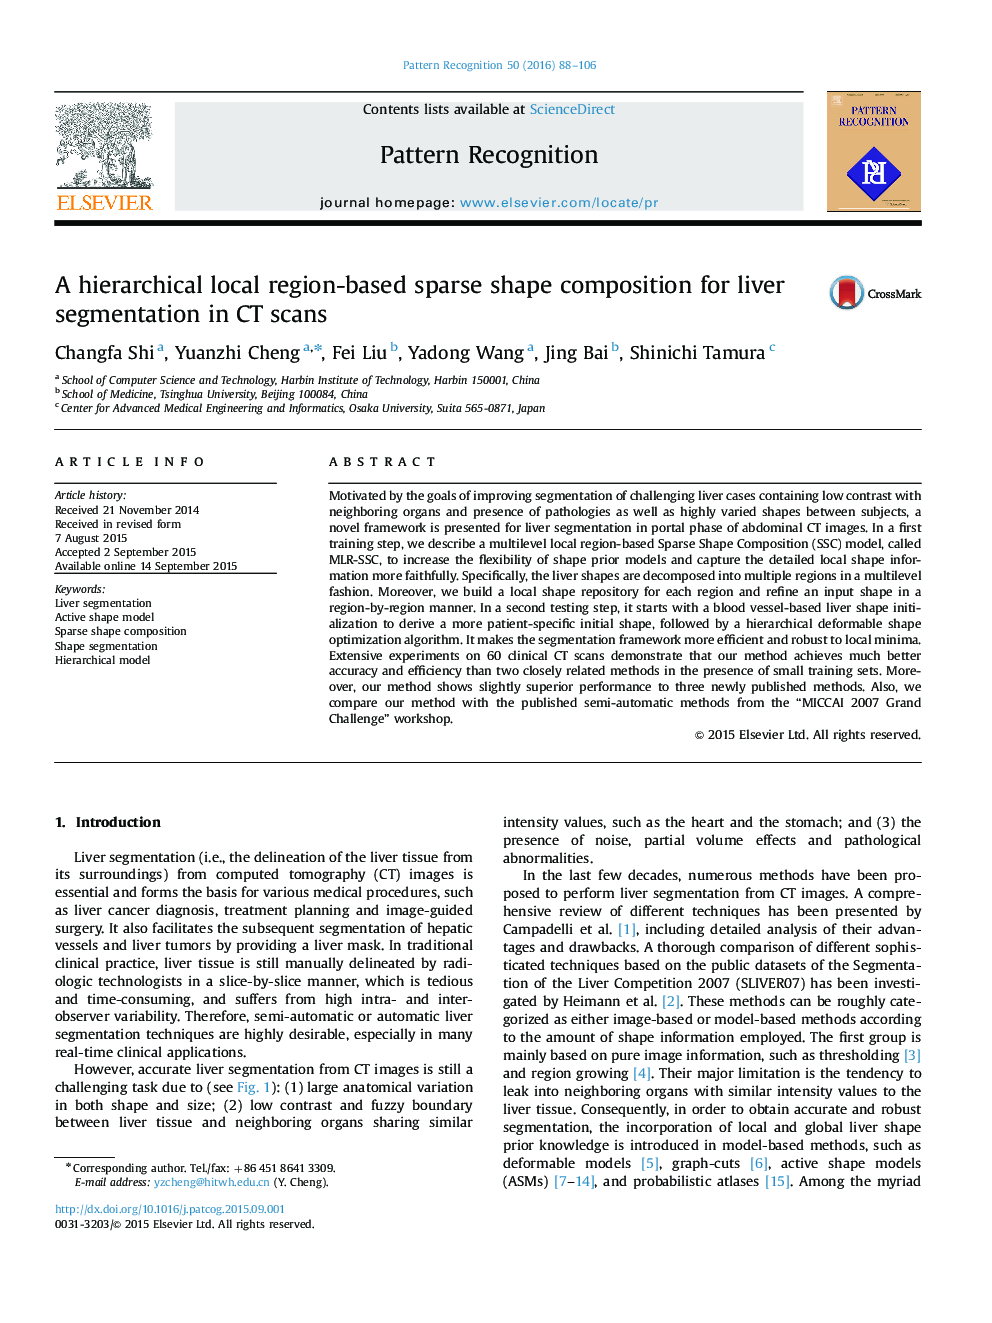 A hierarchical local region-based sparse shape composition for liver segmentation in CT scans